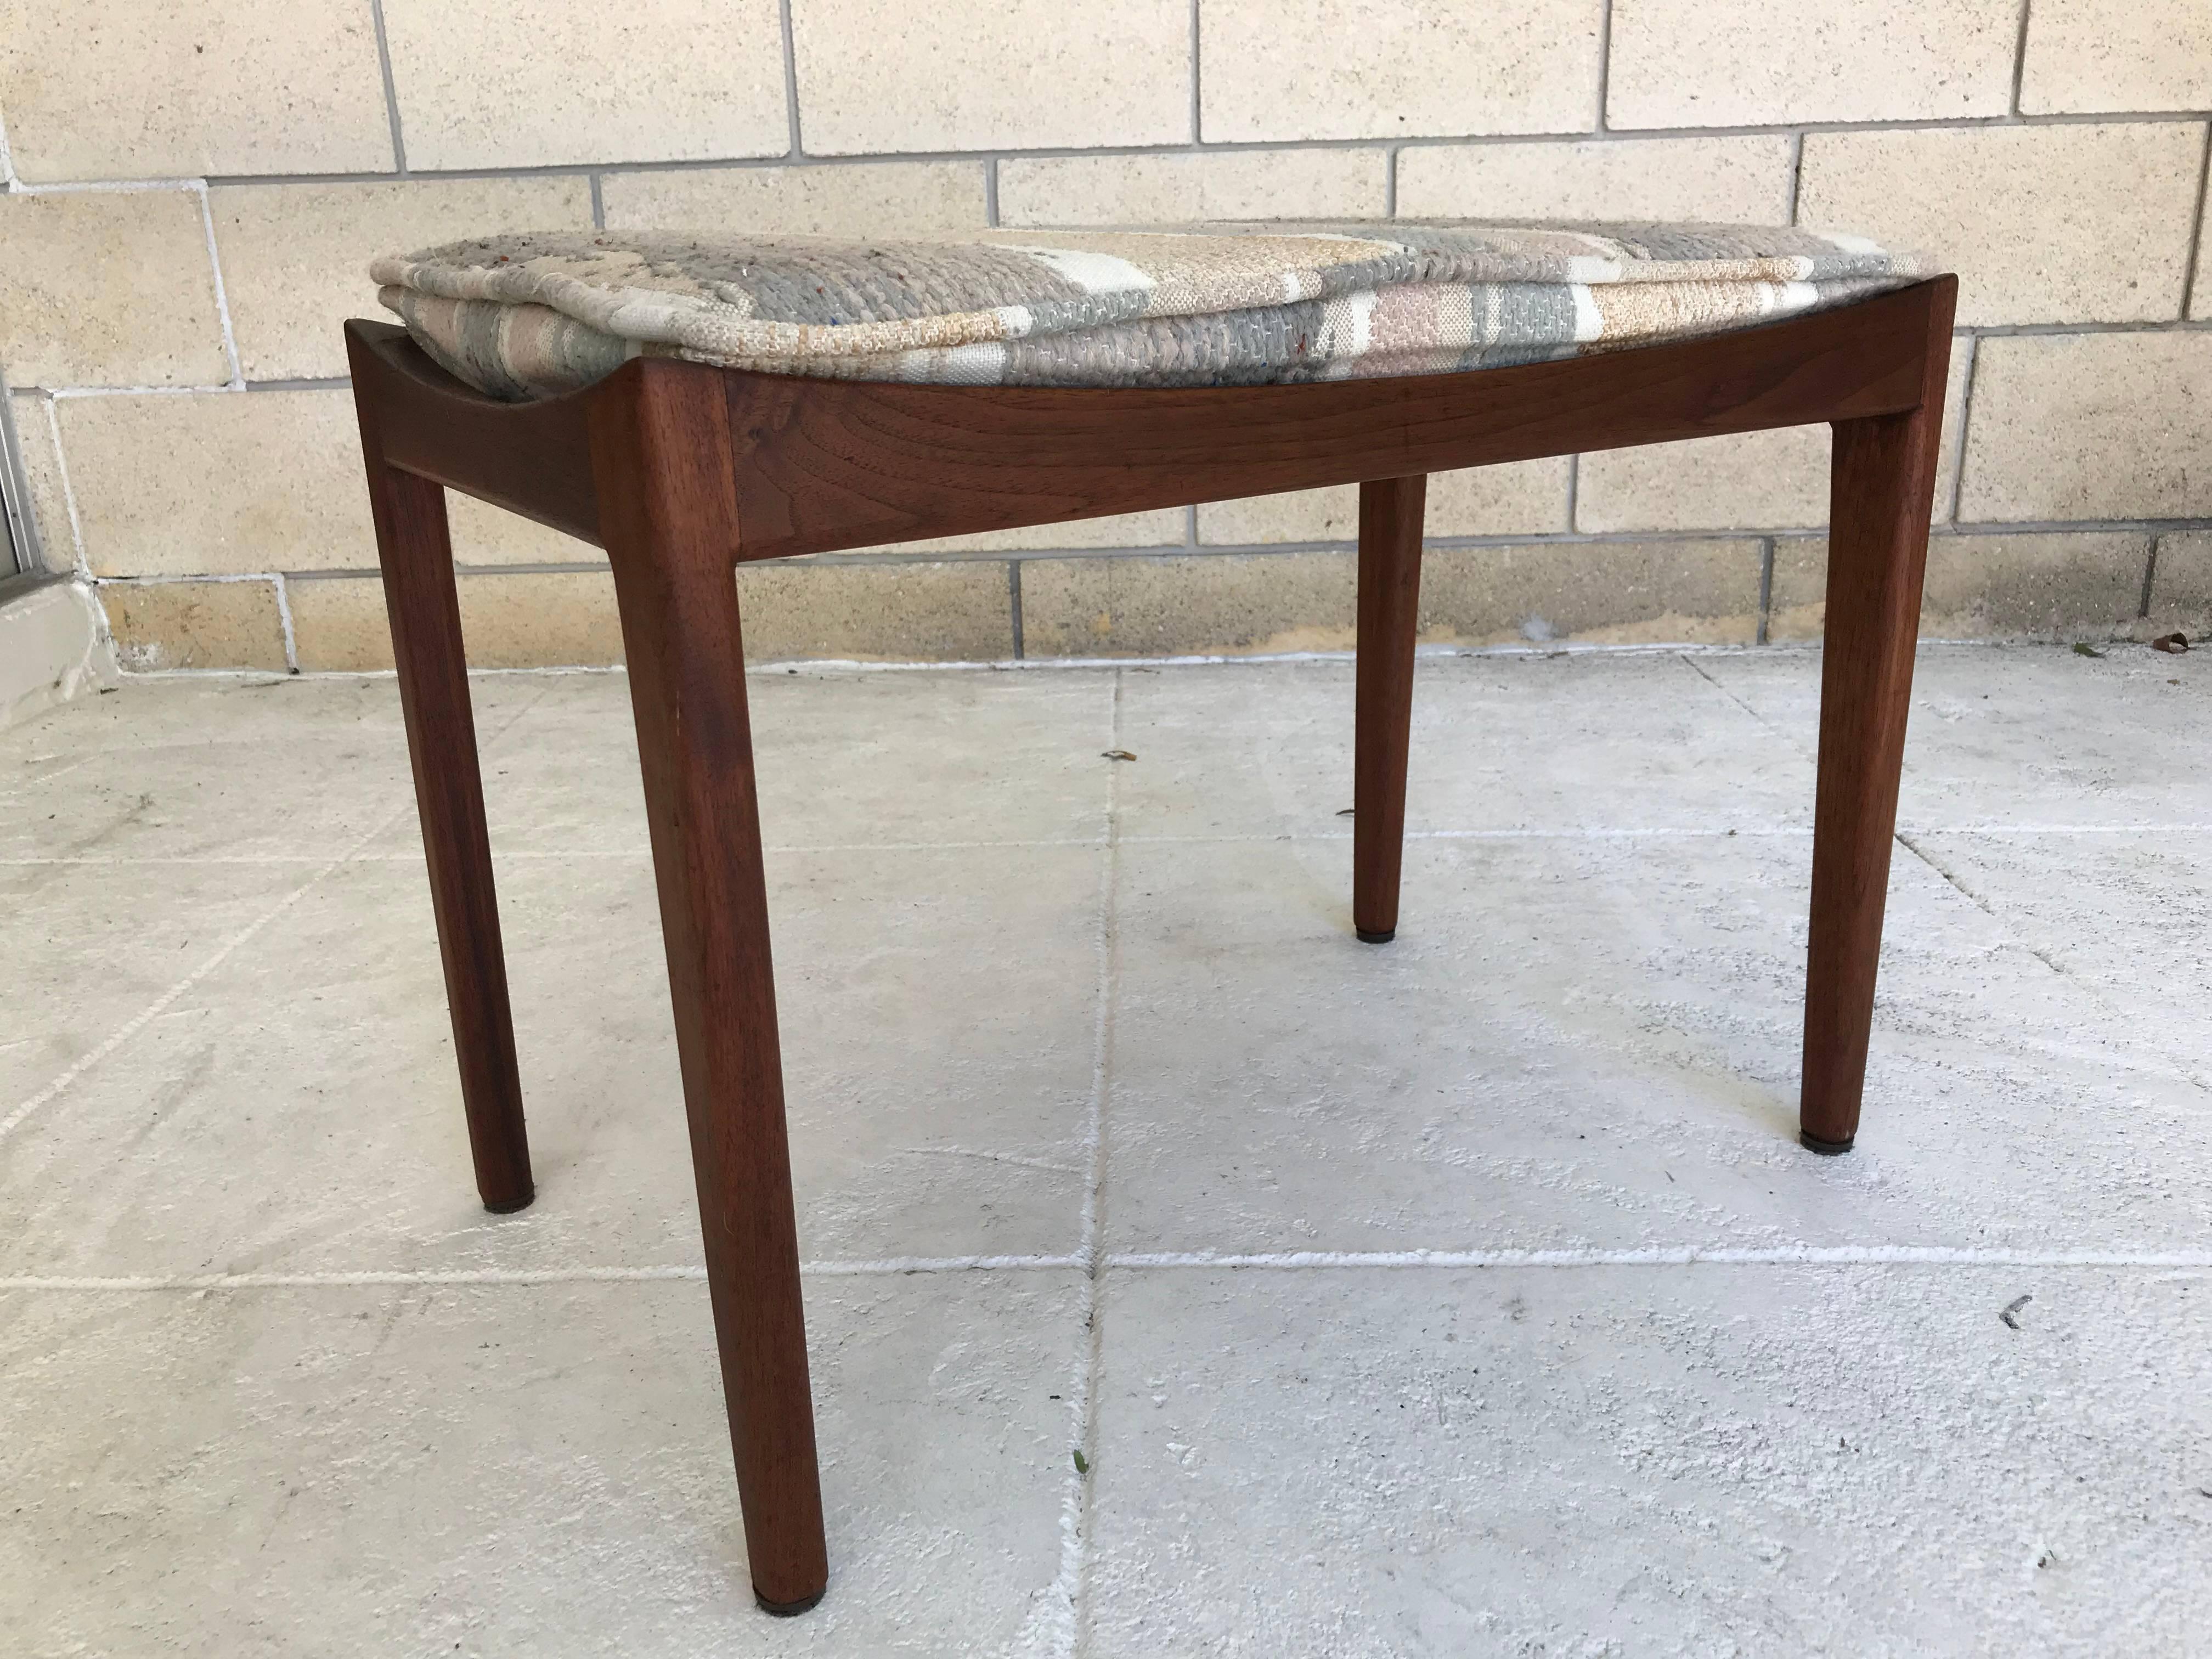 Rare petite occasional bench designed by Jens Risom. The bench came from the estate of an employee of Mr. Risom's and was re-upholstered in the 1980s I'm guessing. The foam needs to be replaced. The walnut cradle and legs are in original condition